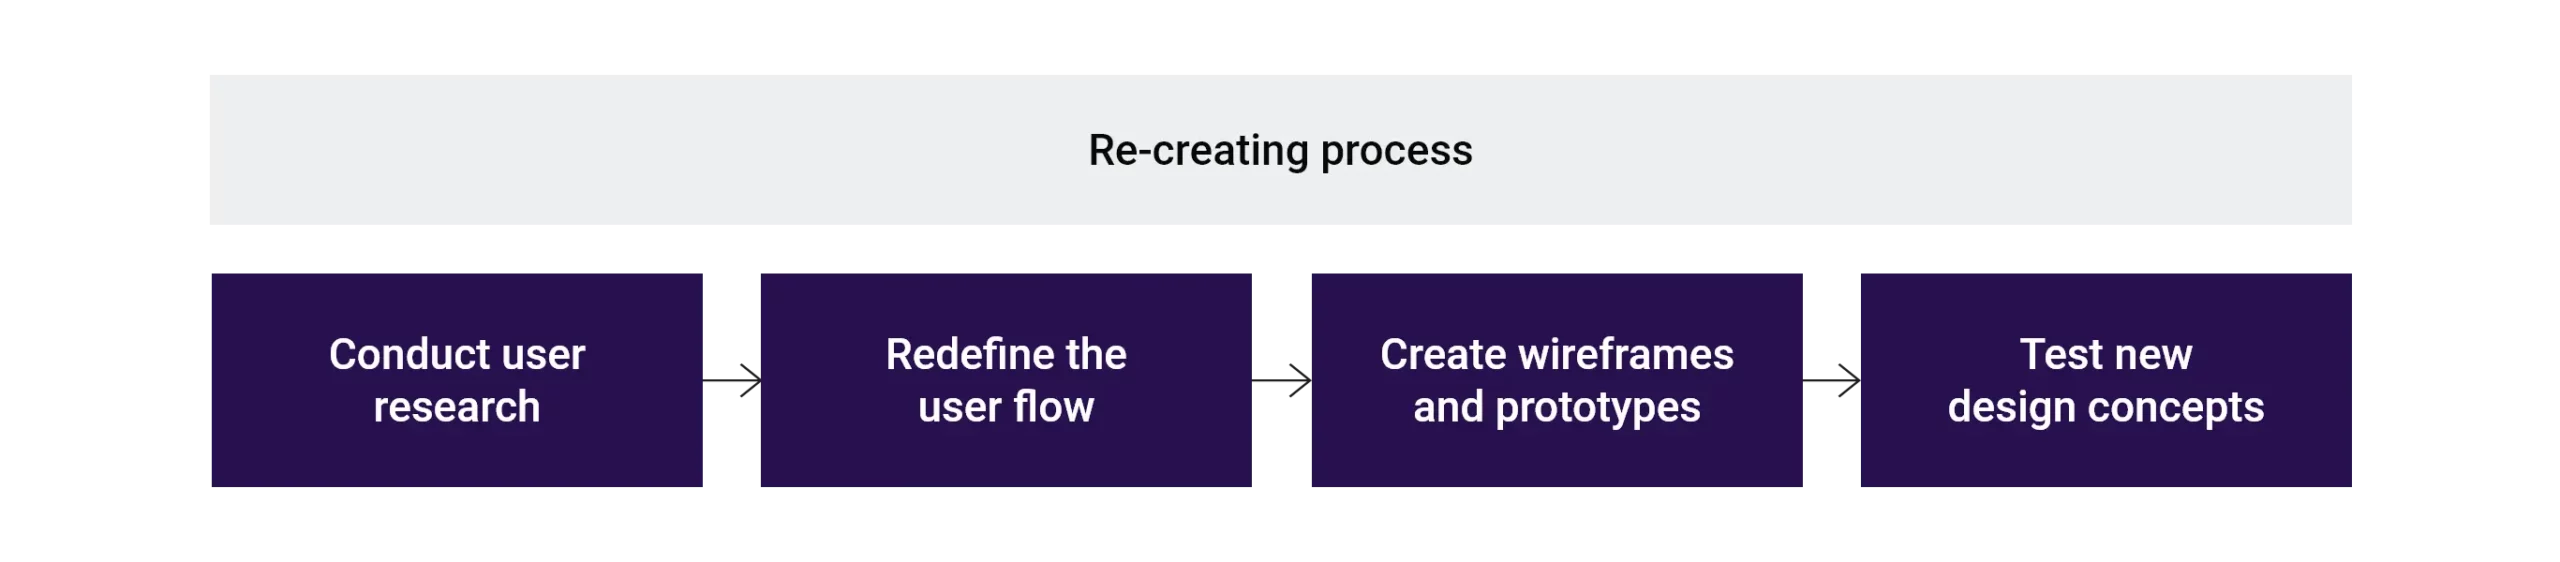 re-creating process 